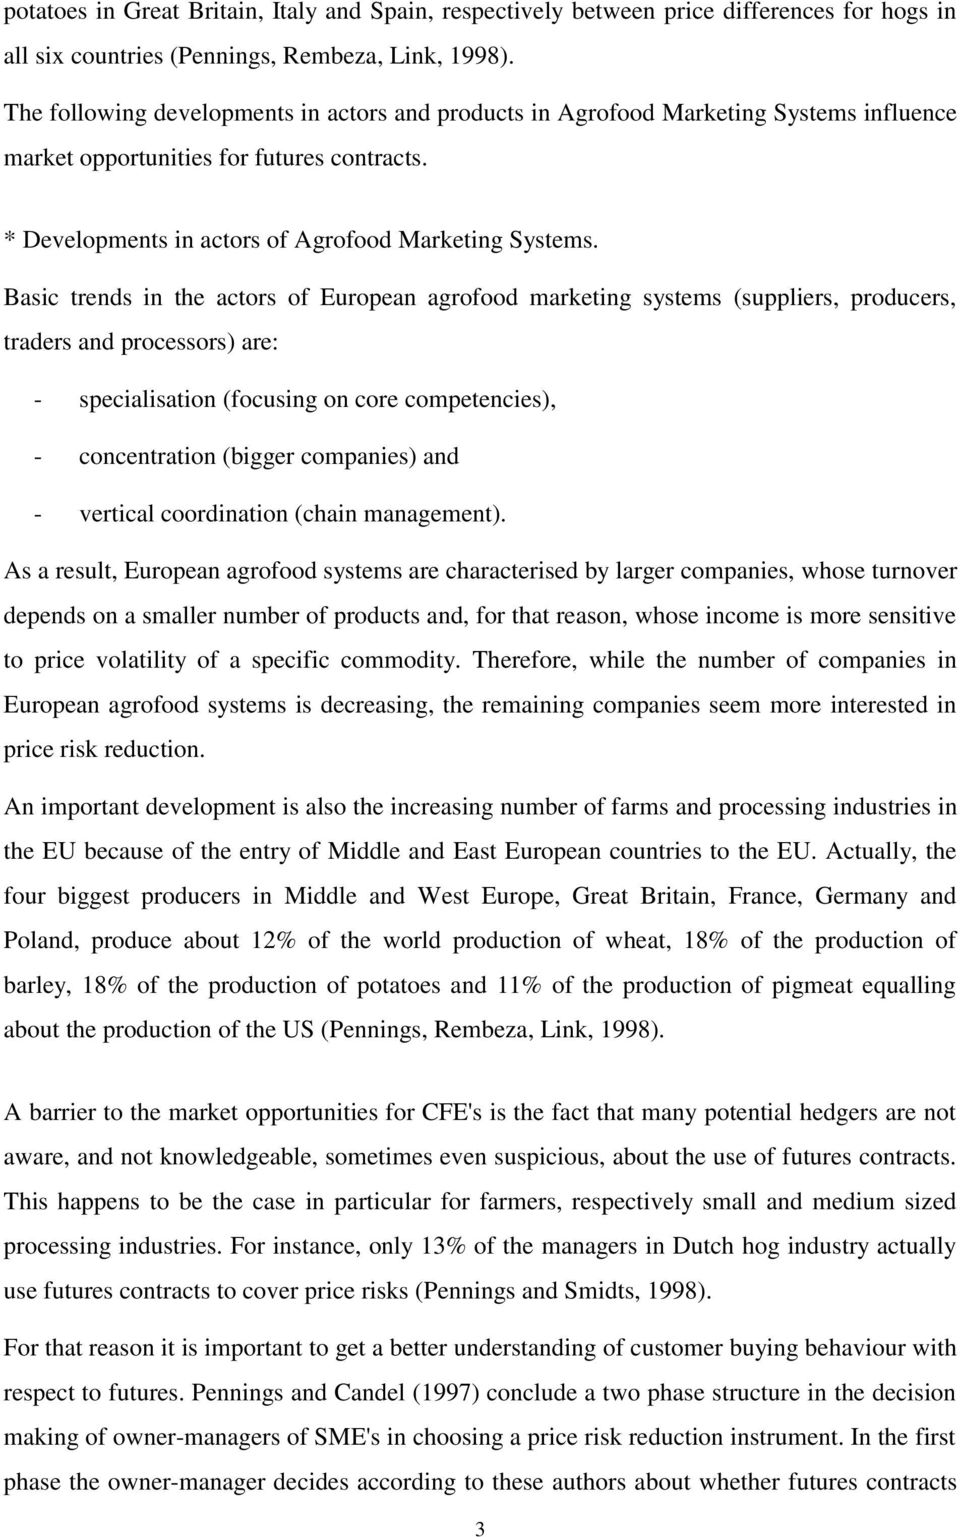 Basic trends in the actors of European agrofood marketing systems (suppliers, producers, traders and processors) are: - specialisation (focusing on core competencies), - concentration (bigger